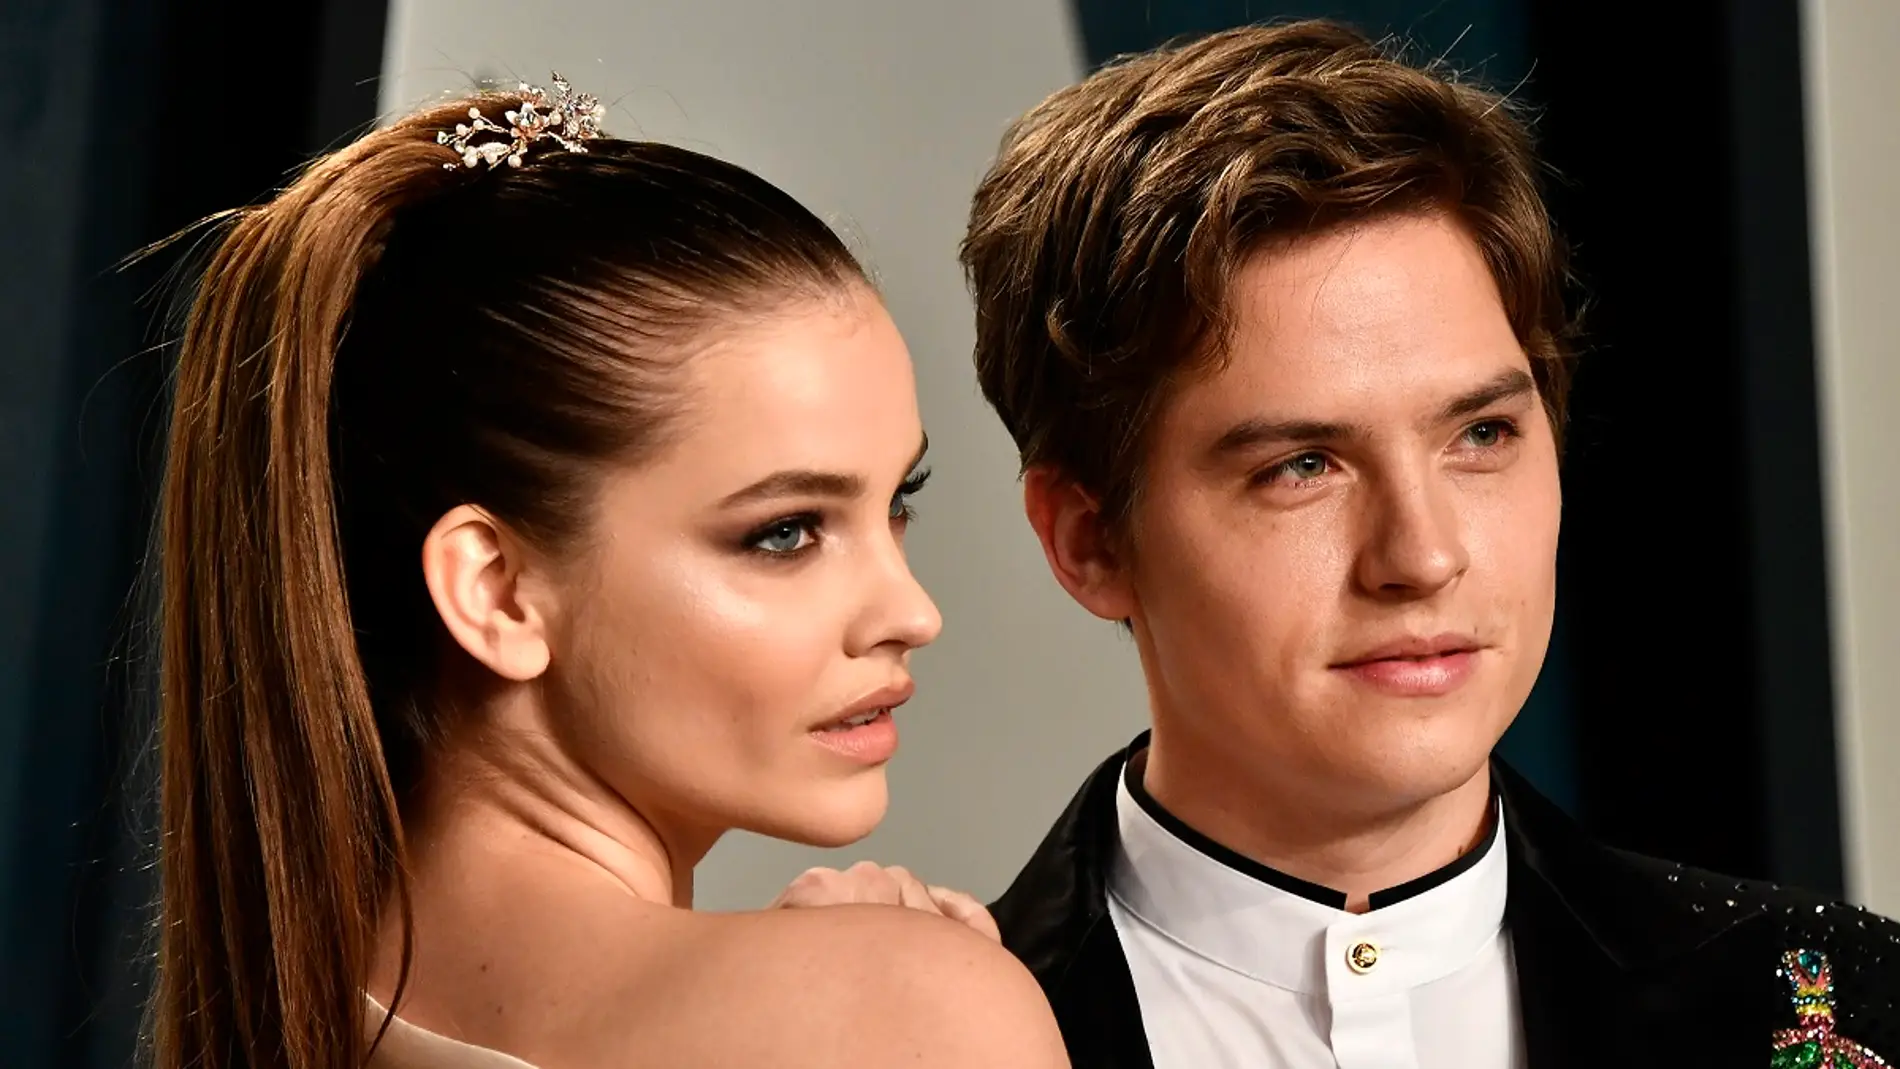 Barbara Palvin y Dylan Sprouse